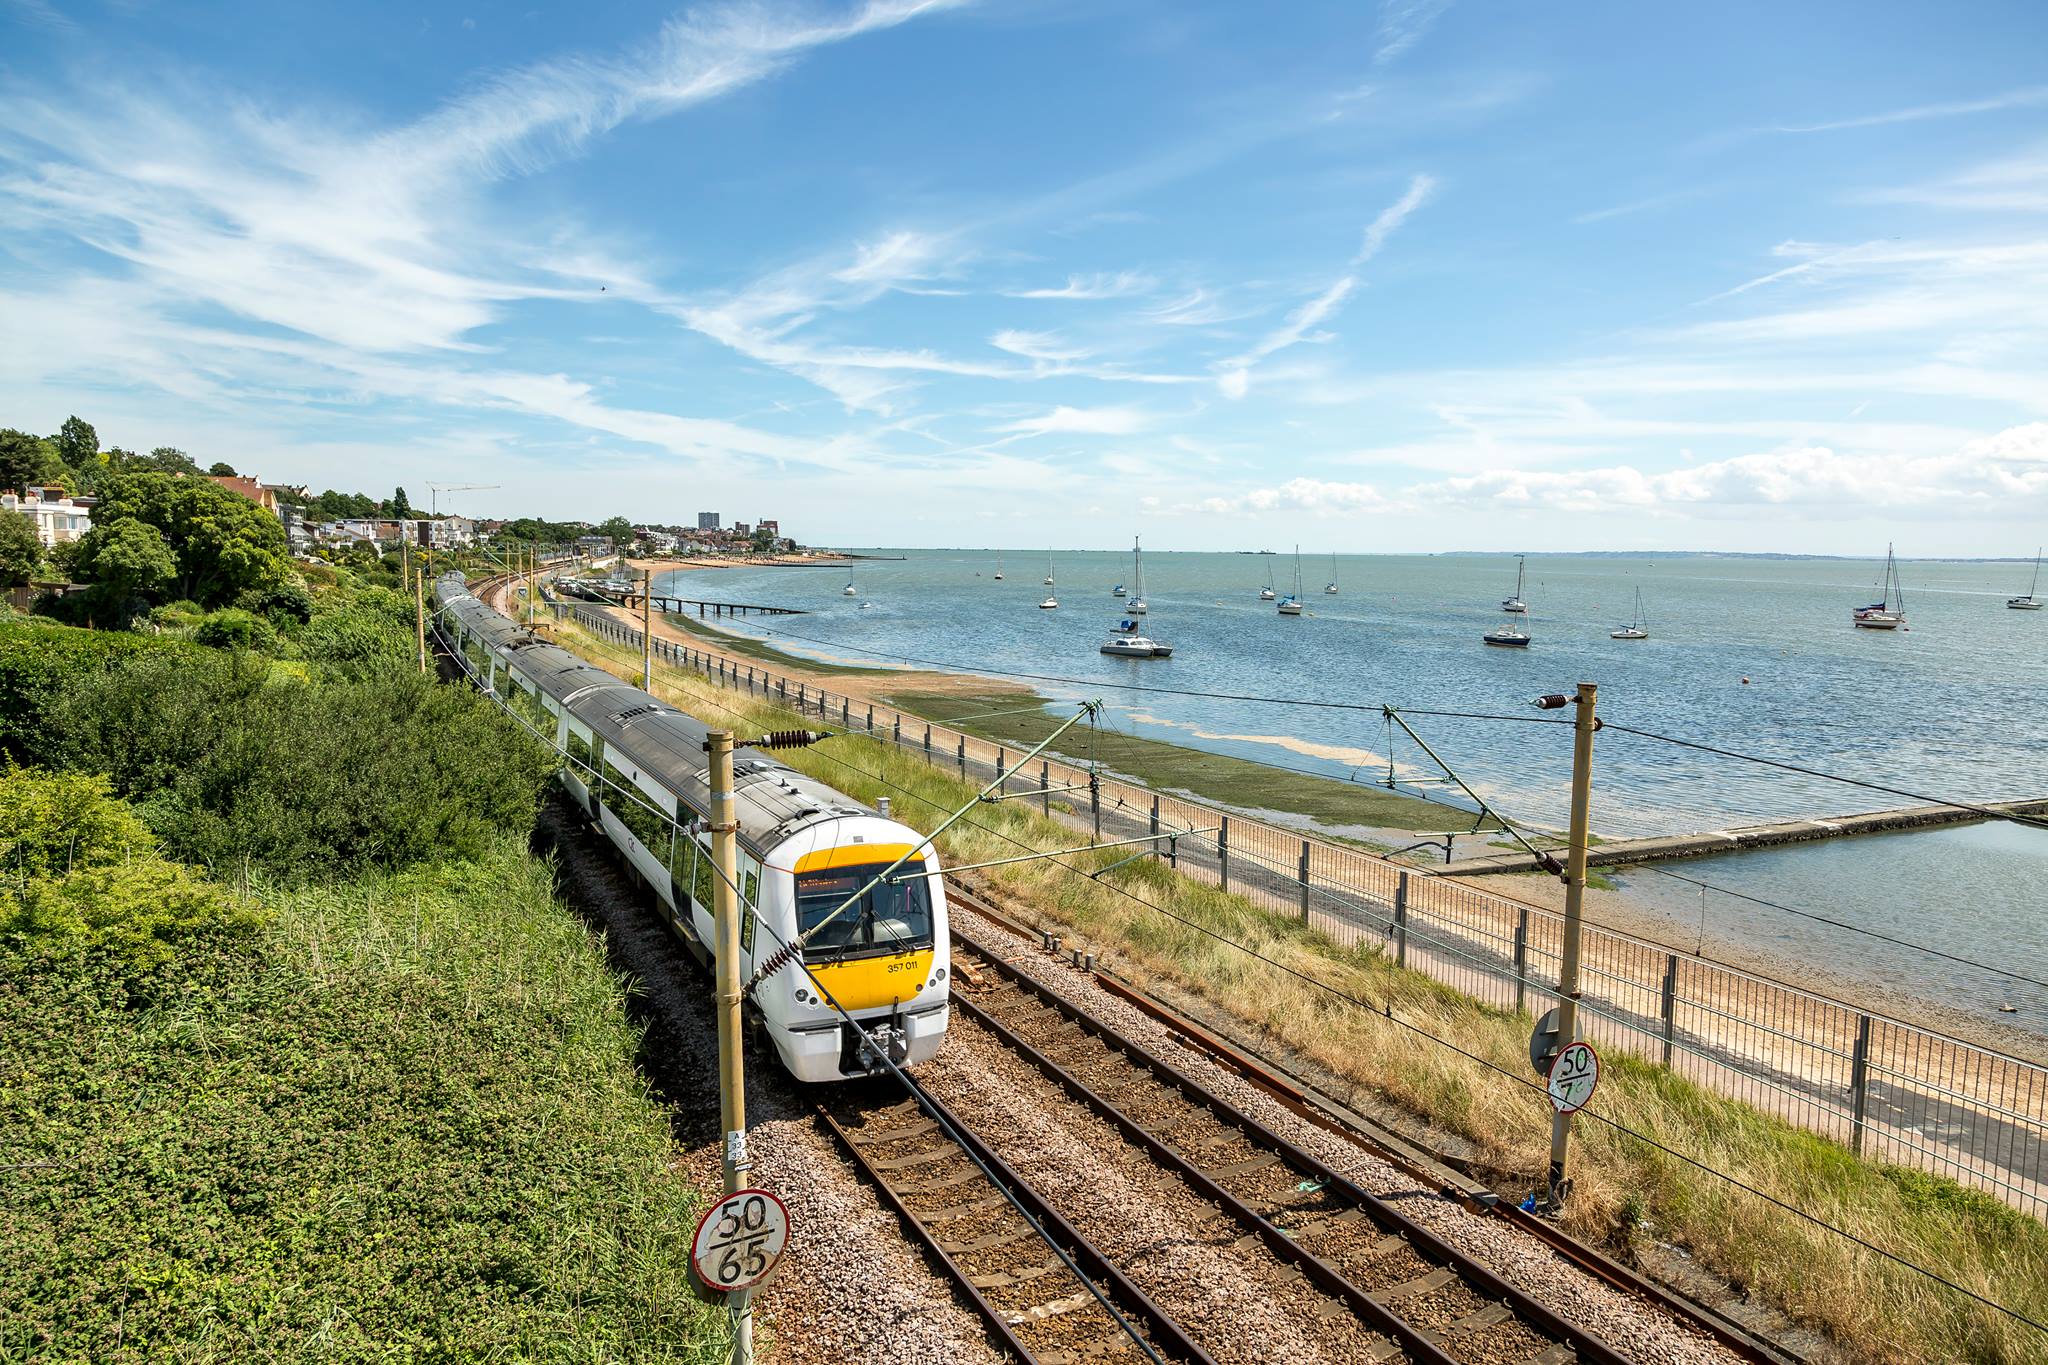 Train travelling on track alongside beach front